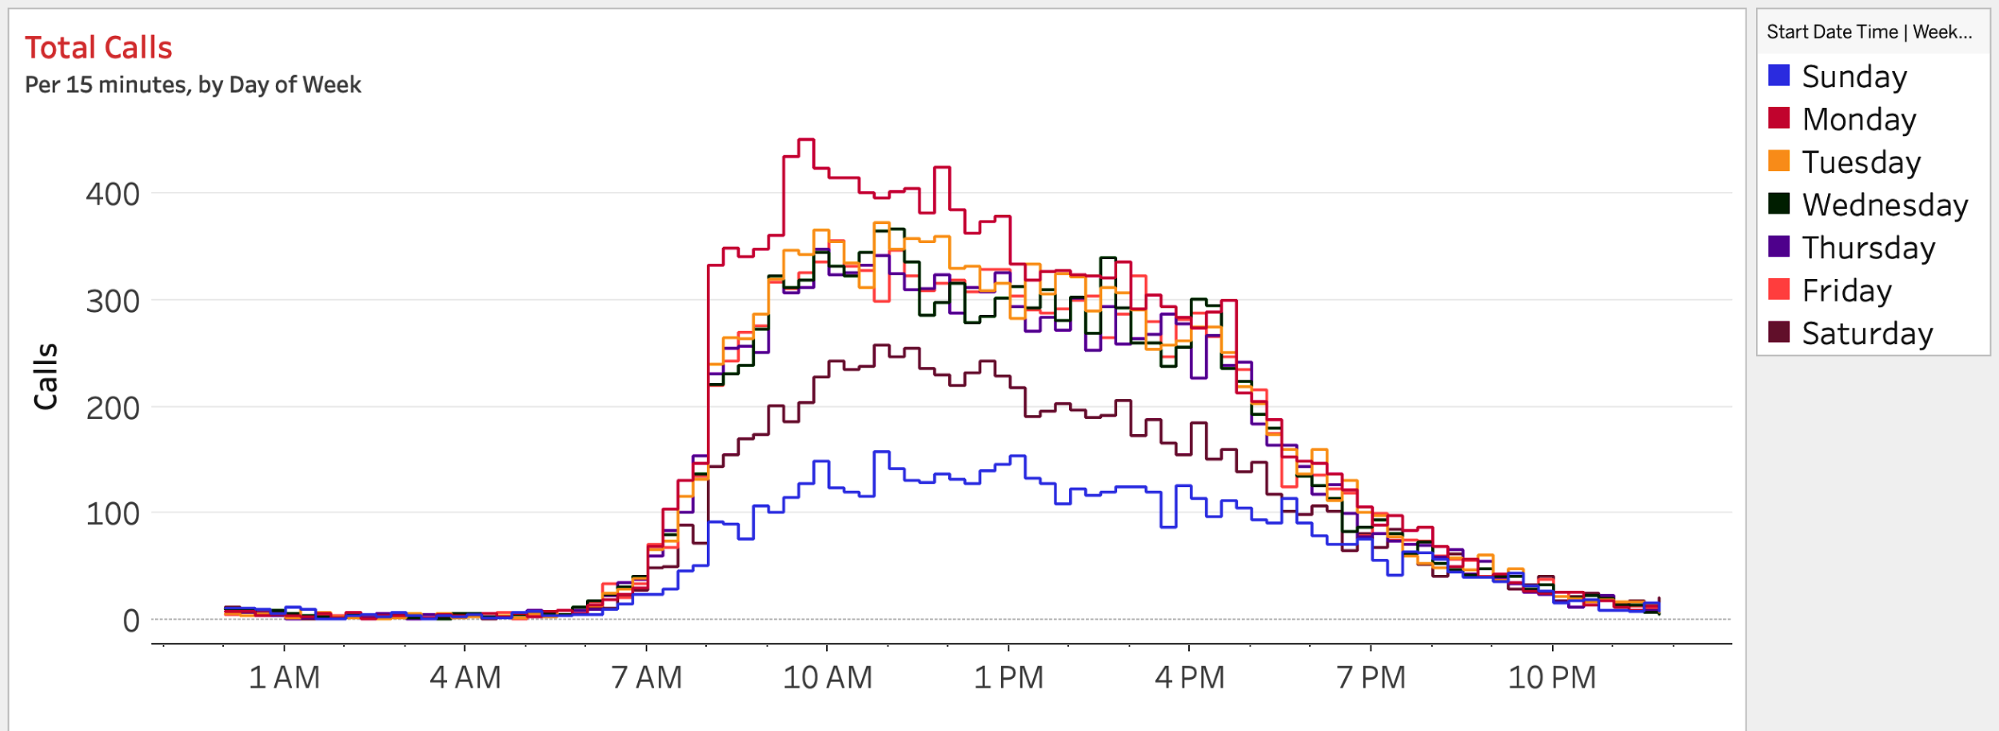 Total calls every 15 minutes of the day, colored by day of the week and using a continuous axis